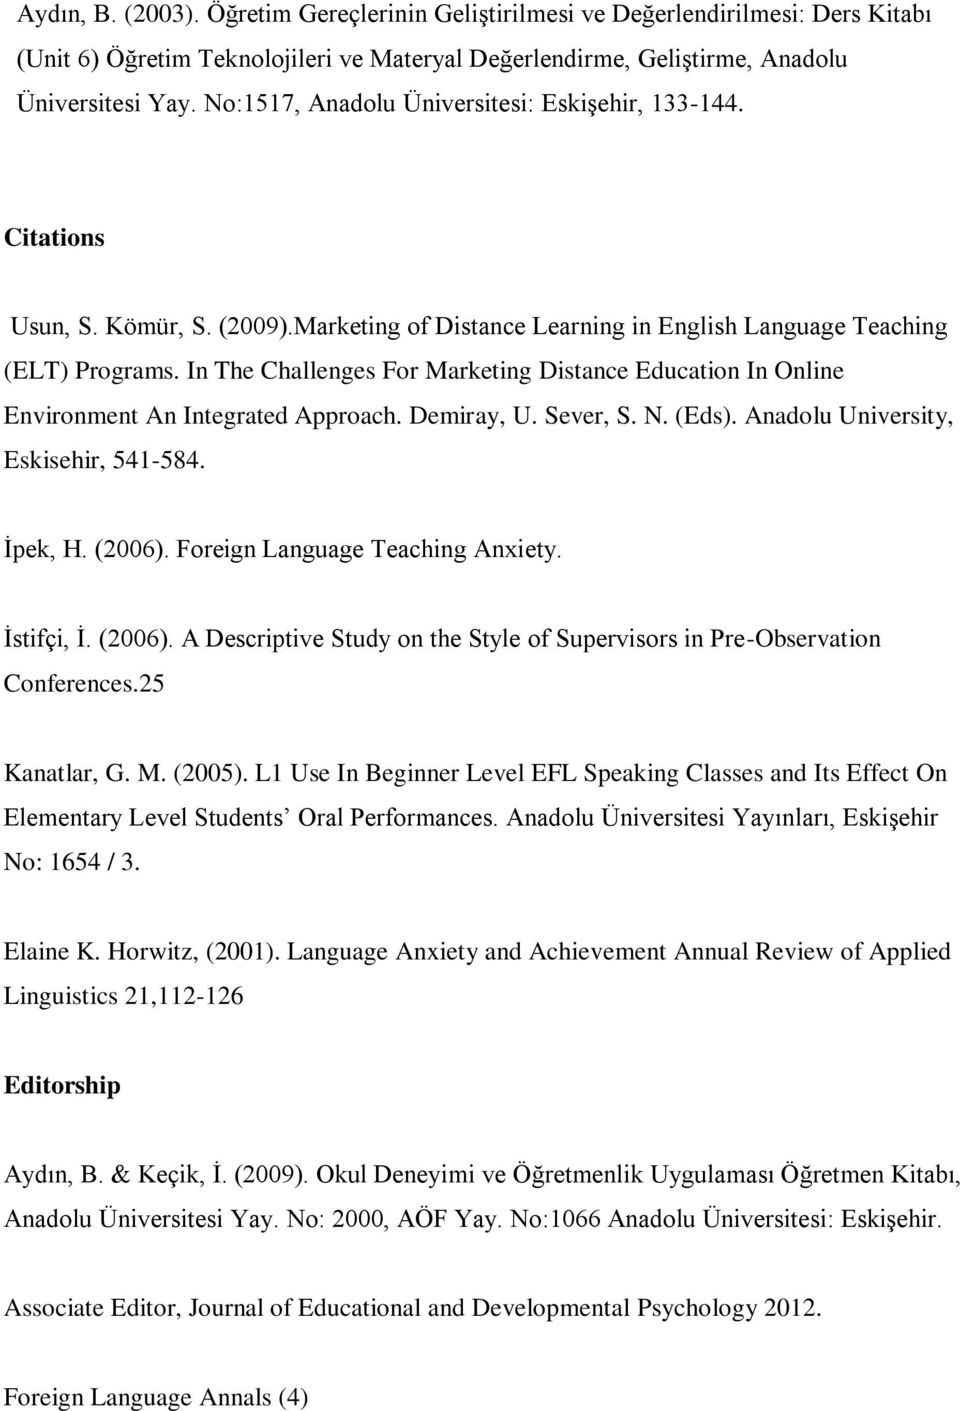 In The Challenges For Marketing Distance Education In Online Environment An Integrated Approach. Demiray, U. Sever, S. N. (Eds). Anadolu University, Eskisehir, 541-584. İpek, H. (2006).